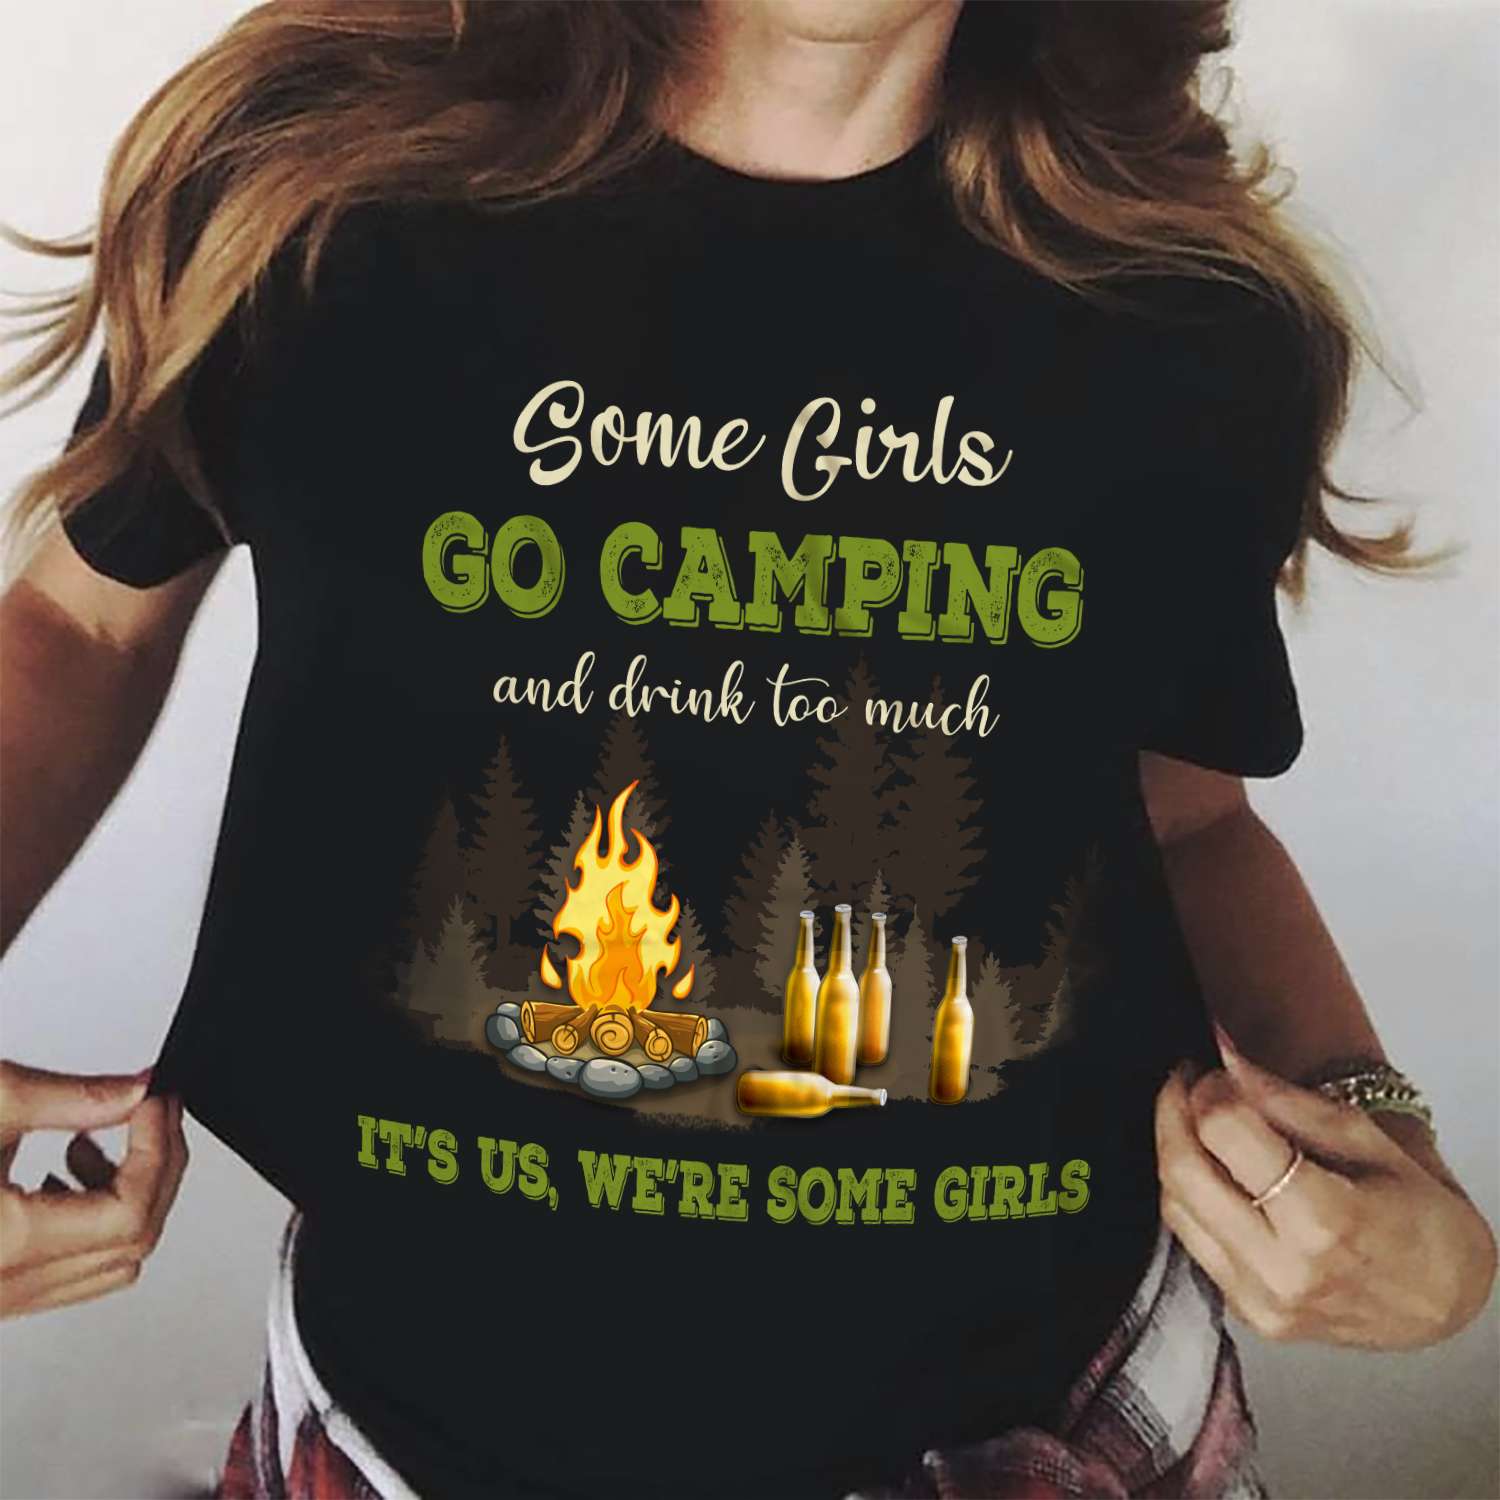 Some girls go camping and drink too much - Camping and drinking